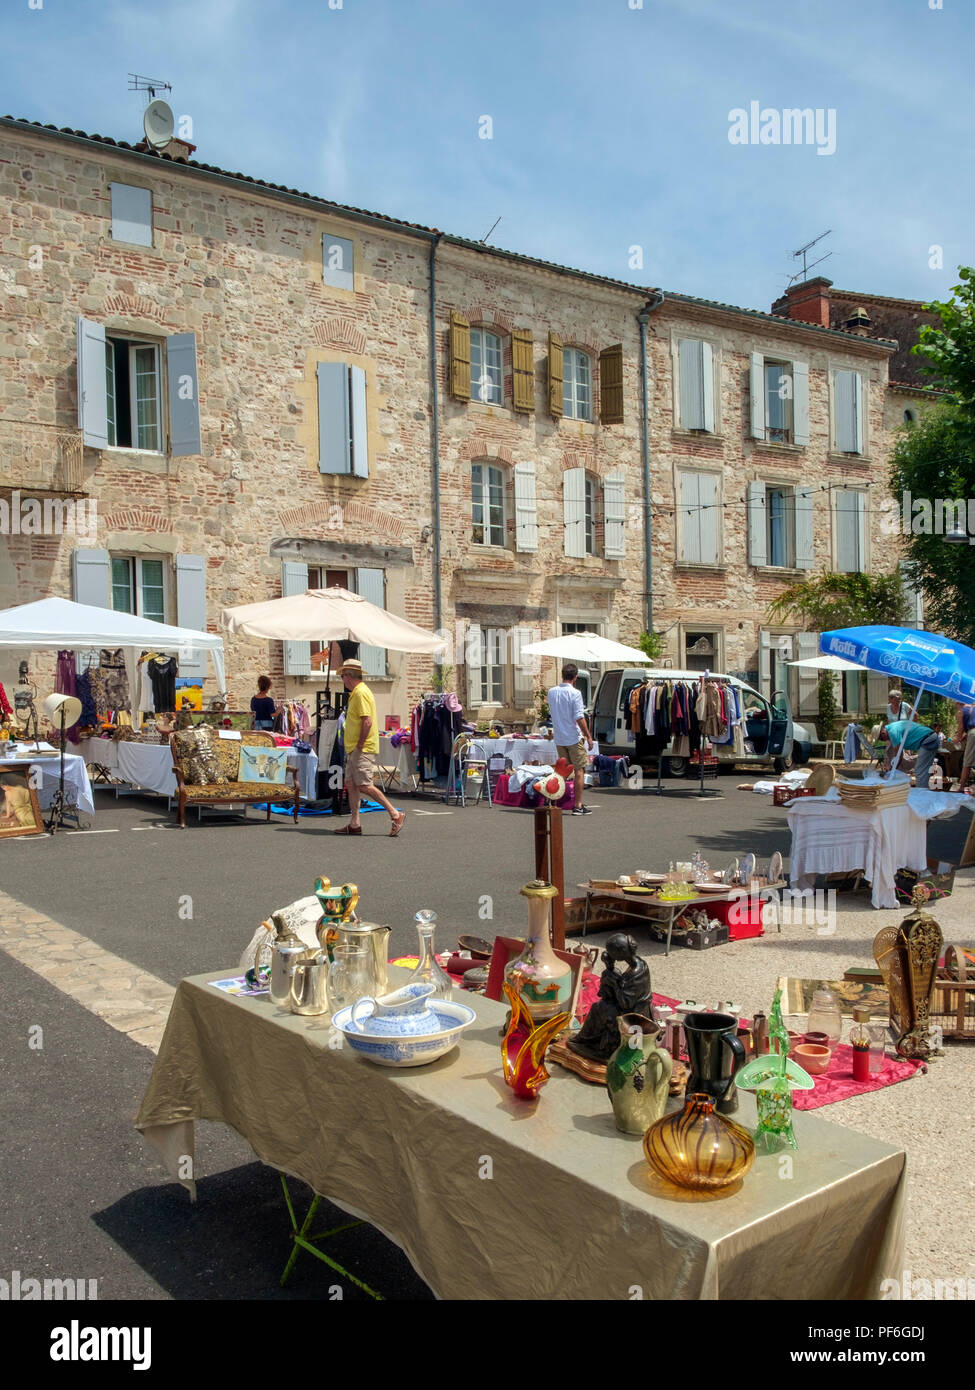 Penne d'Agenais, France - 24th June 2018: Plenty of people come out on a sunny Sunday morning to inspect the stalls at the flea market and table-top sale in picturesque hilltop Penne d'Agenais, Lot et Garonne, France Stock Photo